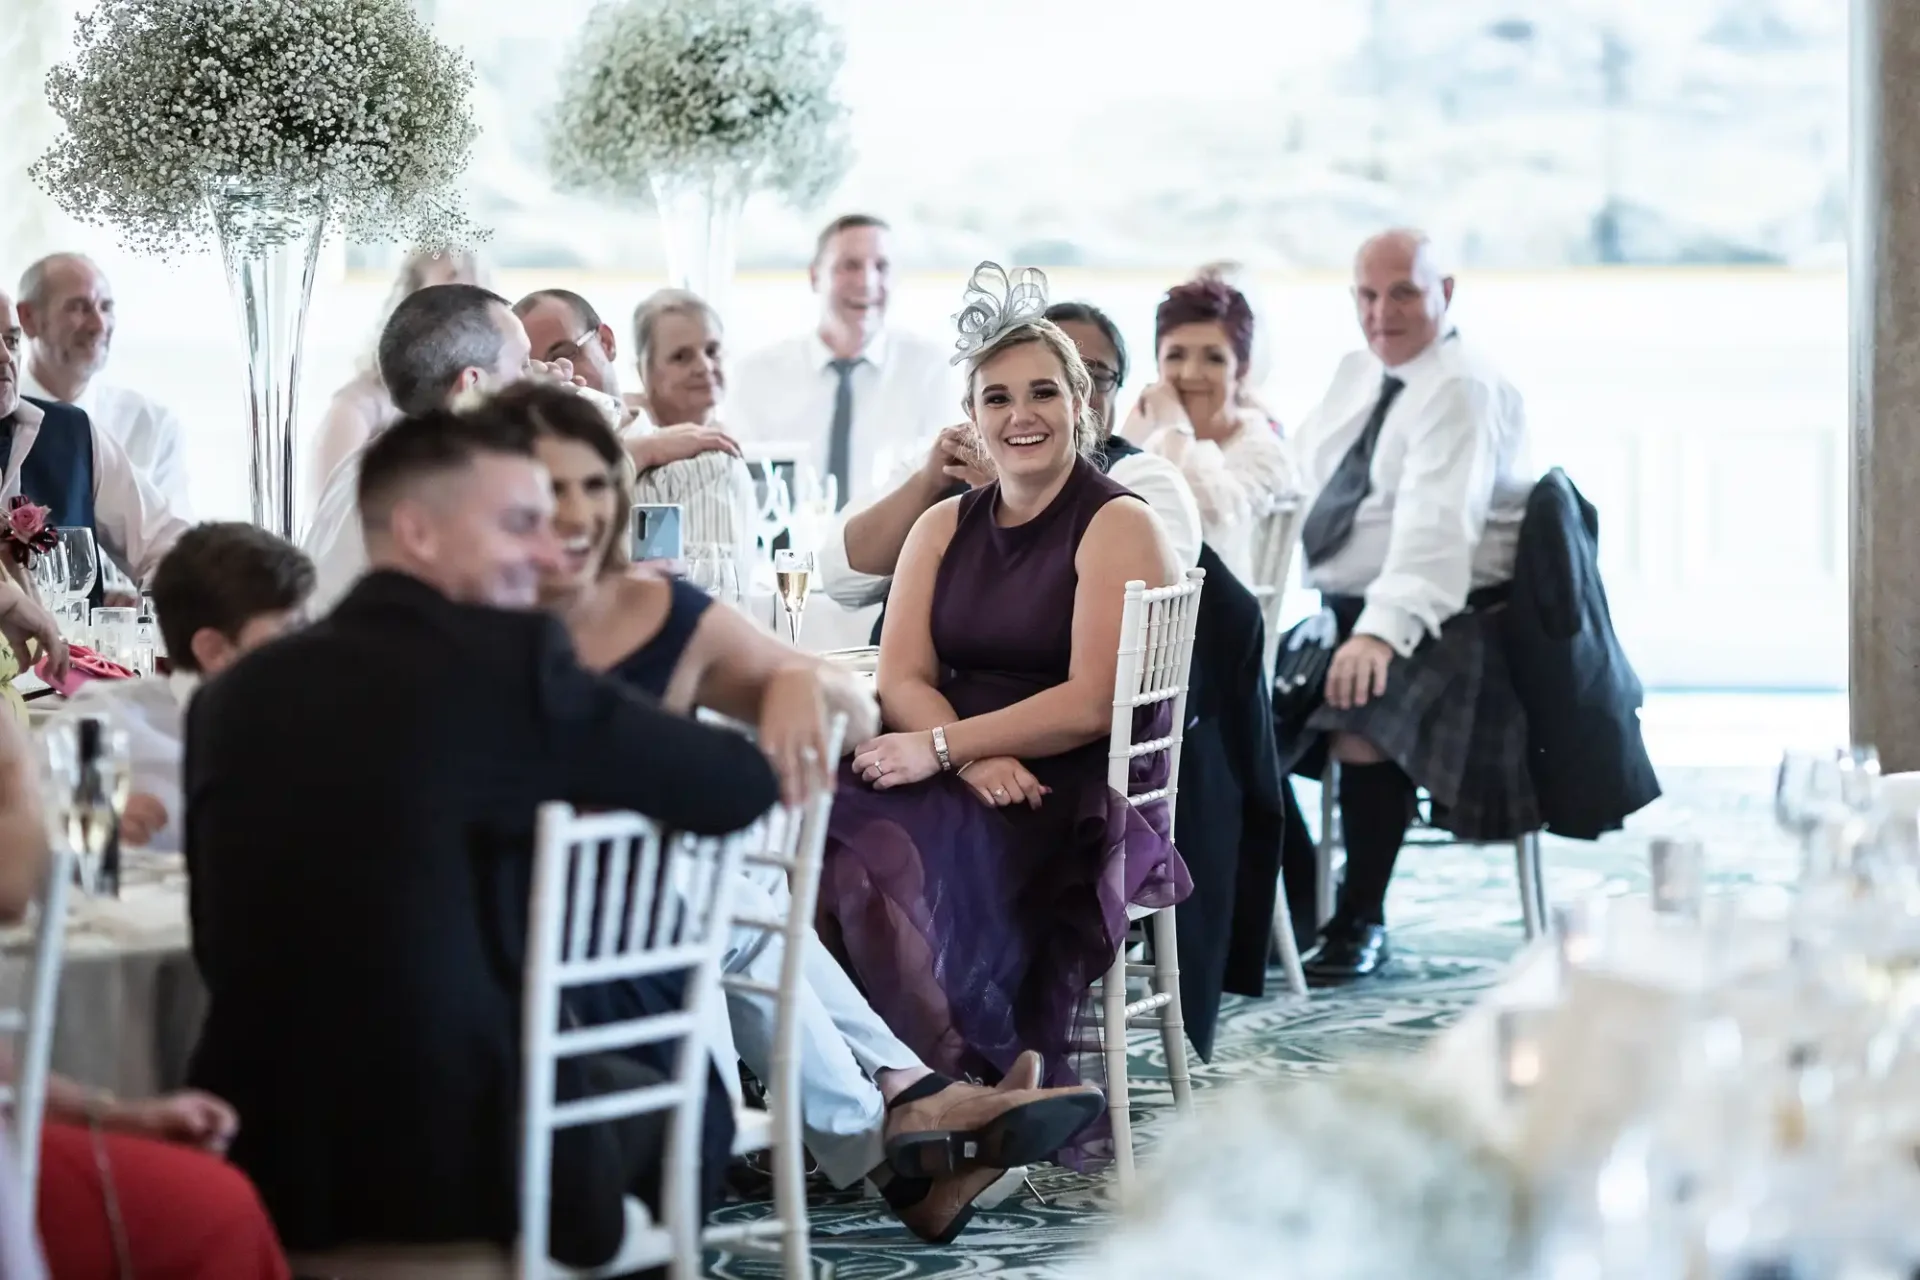 Woman in purple dress smiling at a wedding reception, seated at a table surrounded by guests.